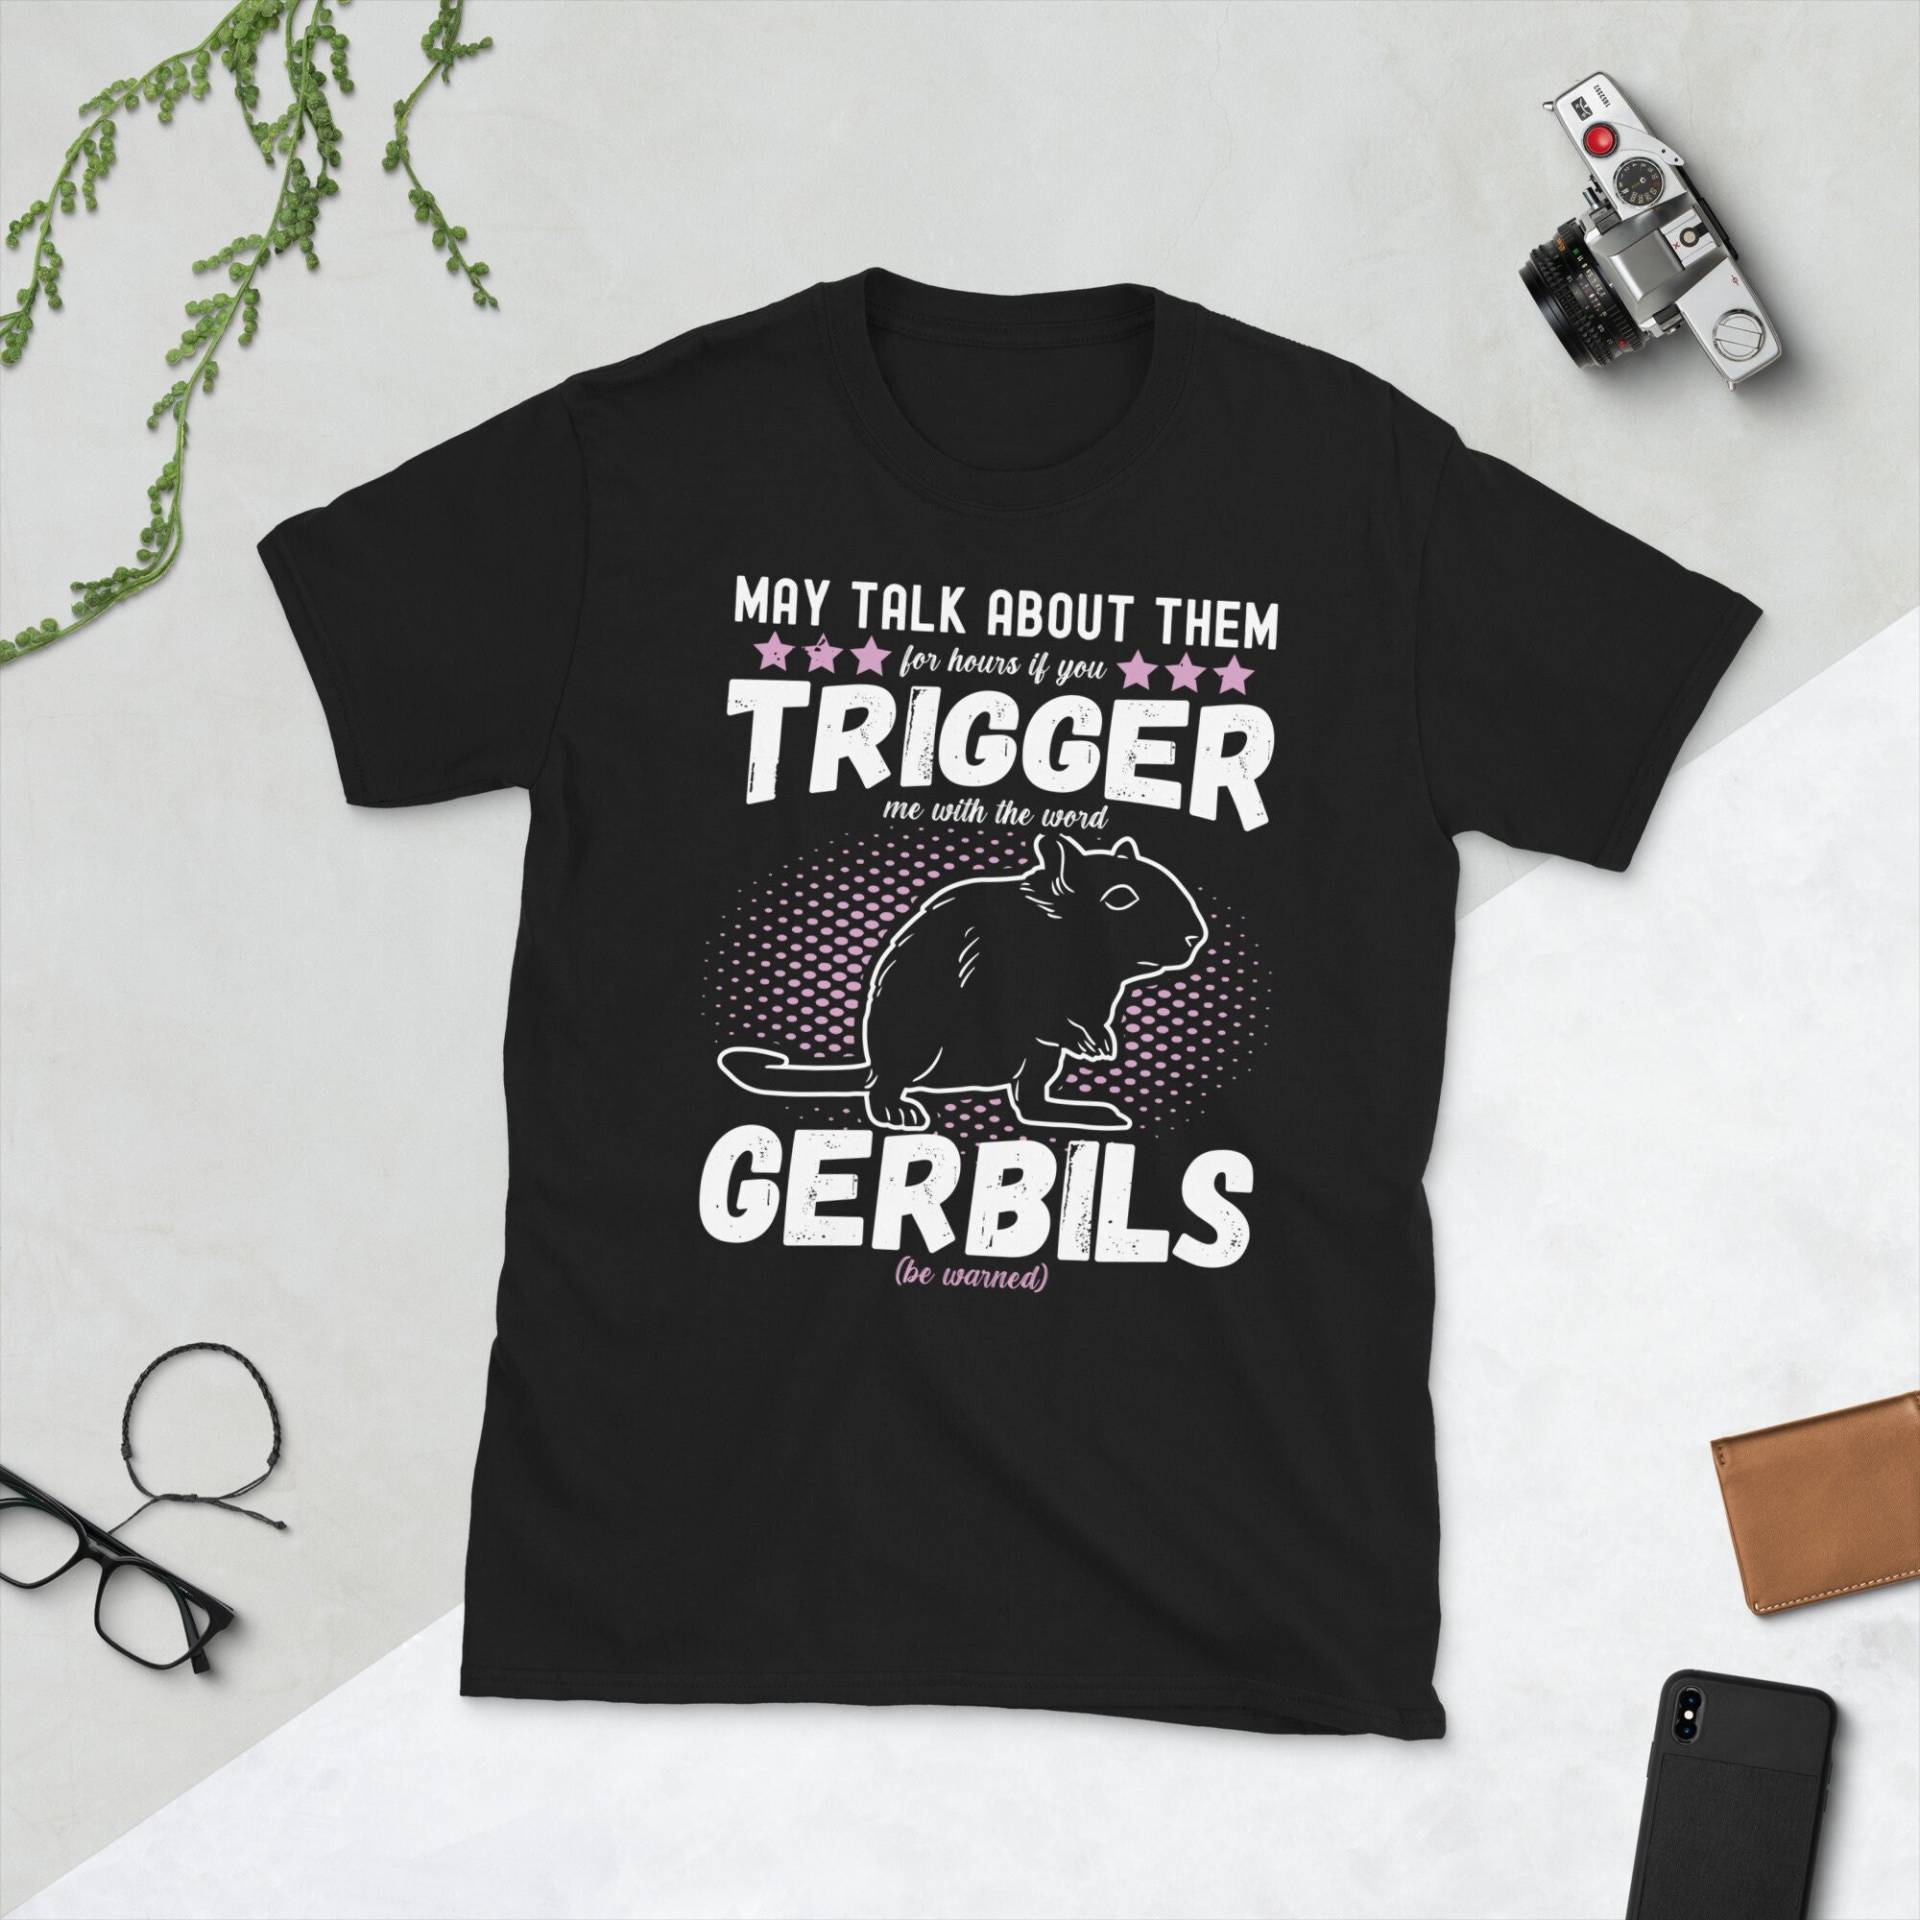 Lustiger Rennmaus Spruch Unisex-T-Shirt | "May Talk About Them For Hours If You Trigger Me With The Word Gerbils | Be Warned" Wüstenrennmaus von Jimbeels